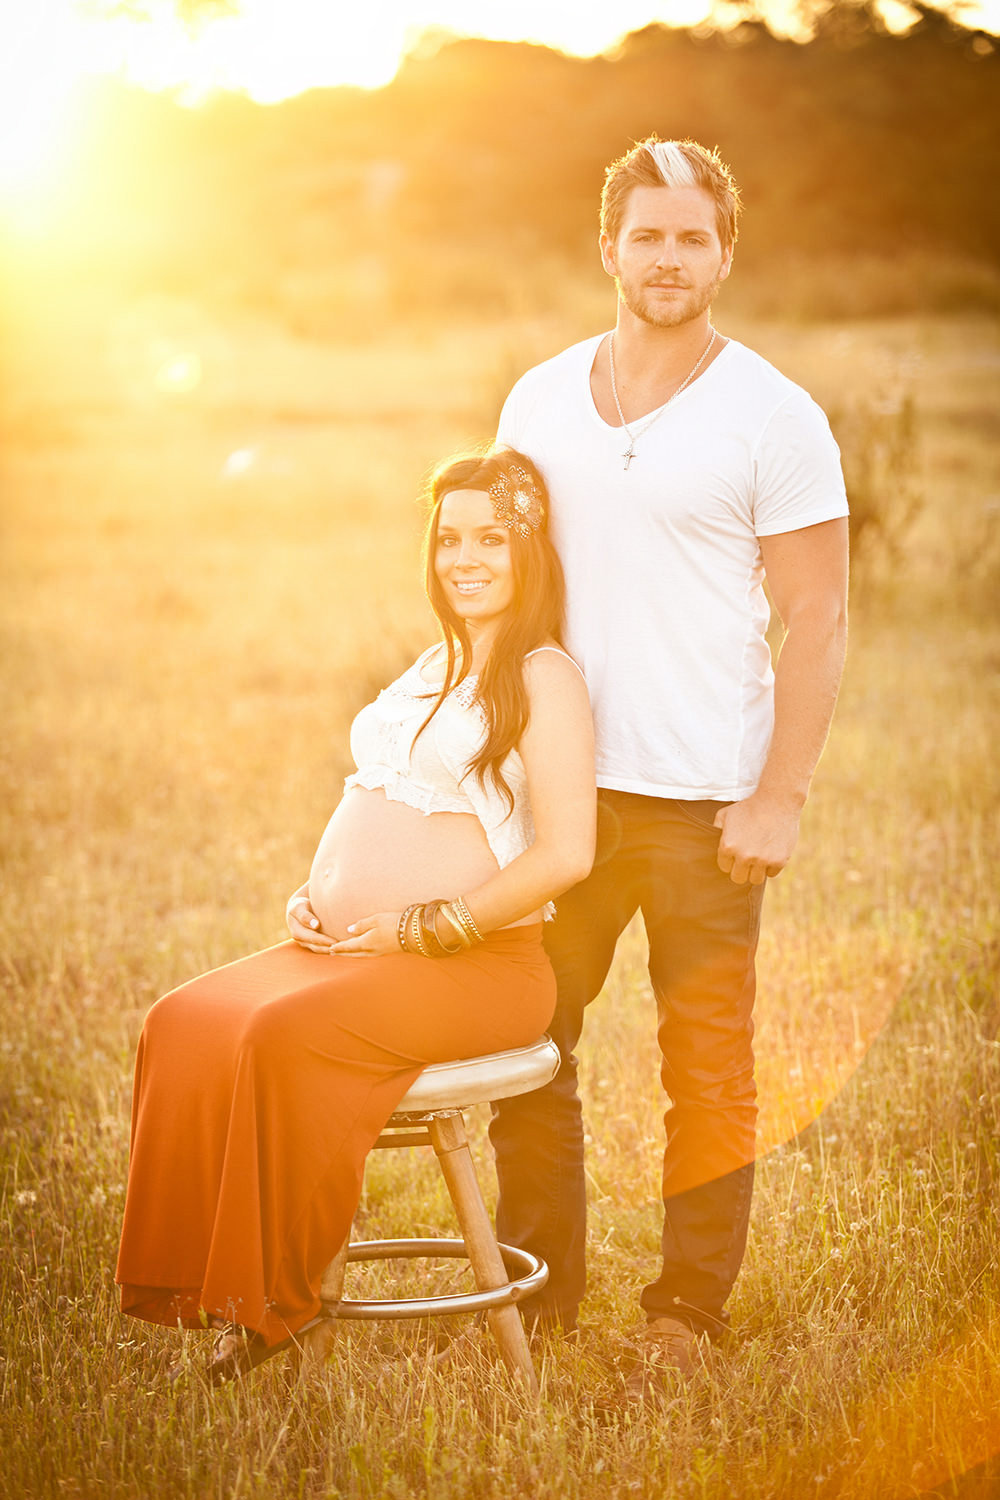 Magnificent Maternity Session in a rustic setting in San Diego.